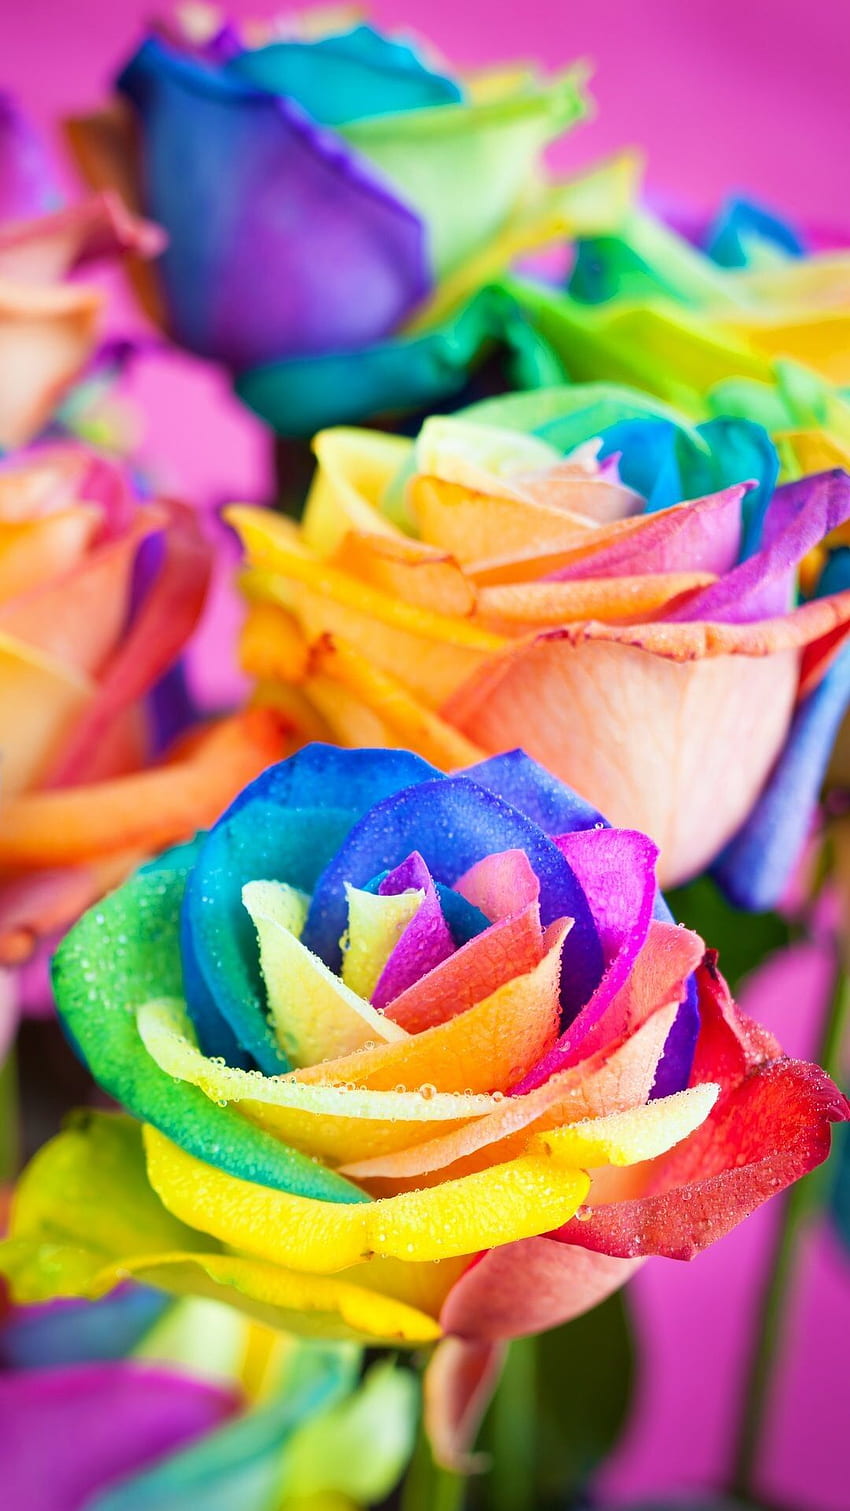 Checkout This For Your iPhone - Colorful Flowers For iPhone HD phone wallpaper